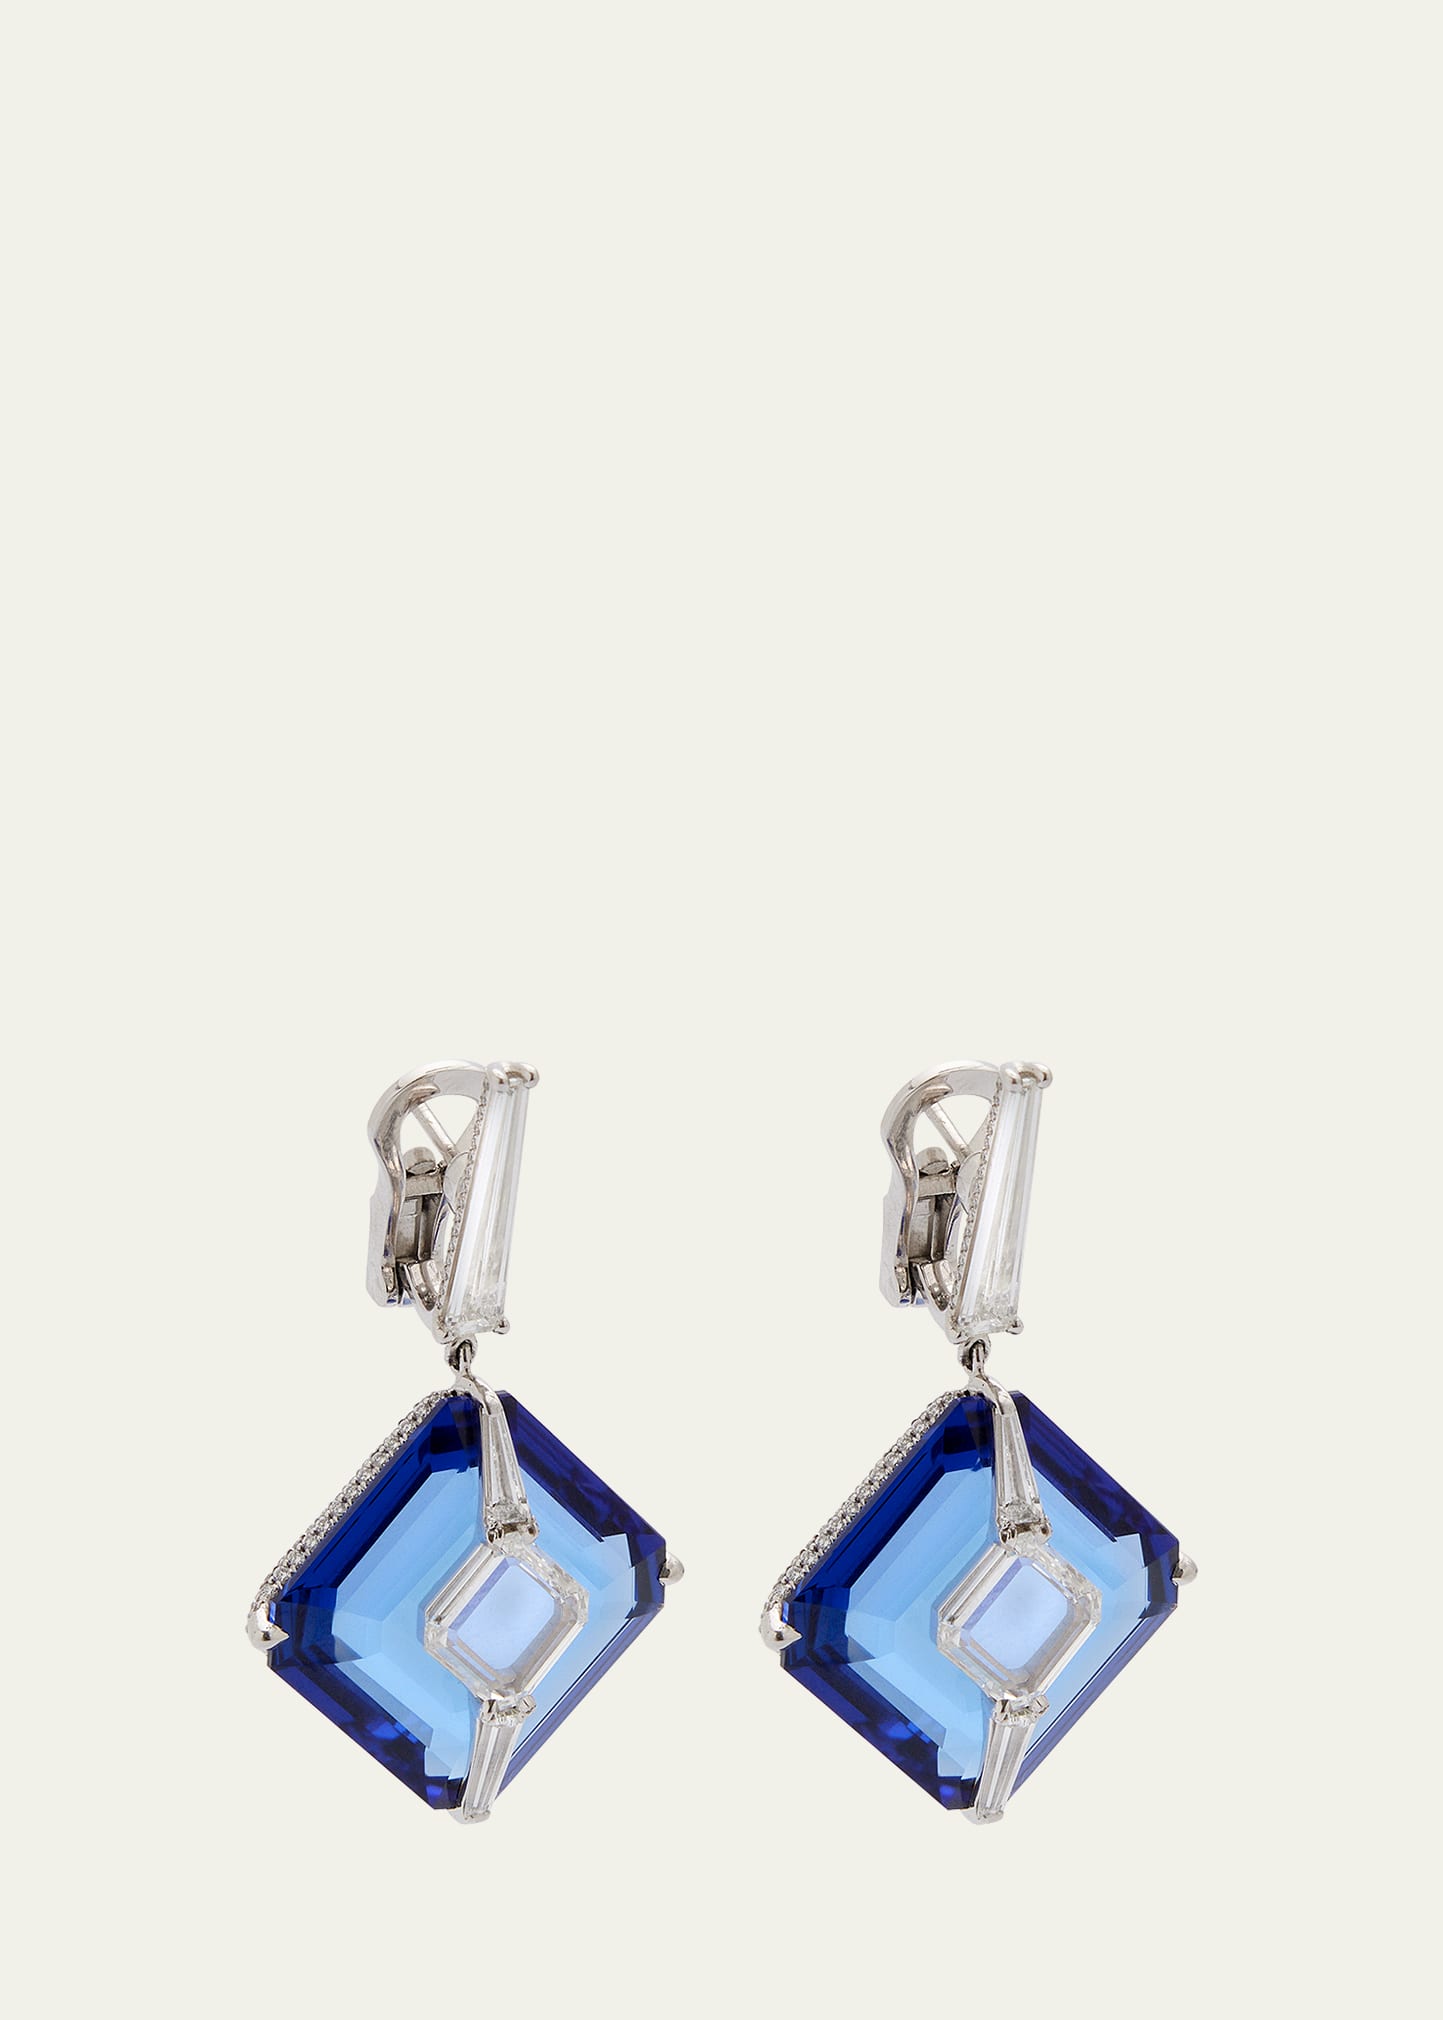 White Gold Portrait Earrings with Diamonds and Tanzanite